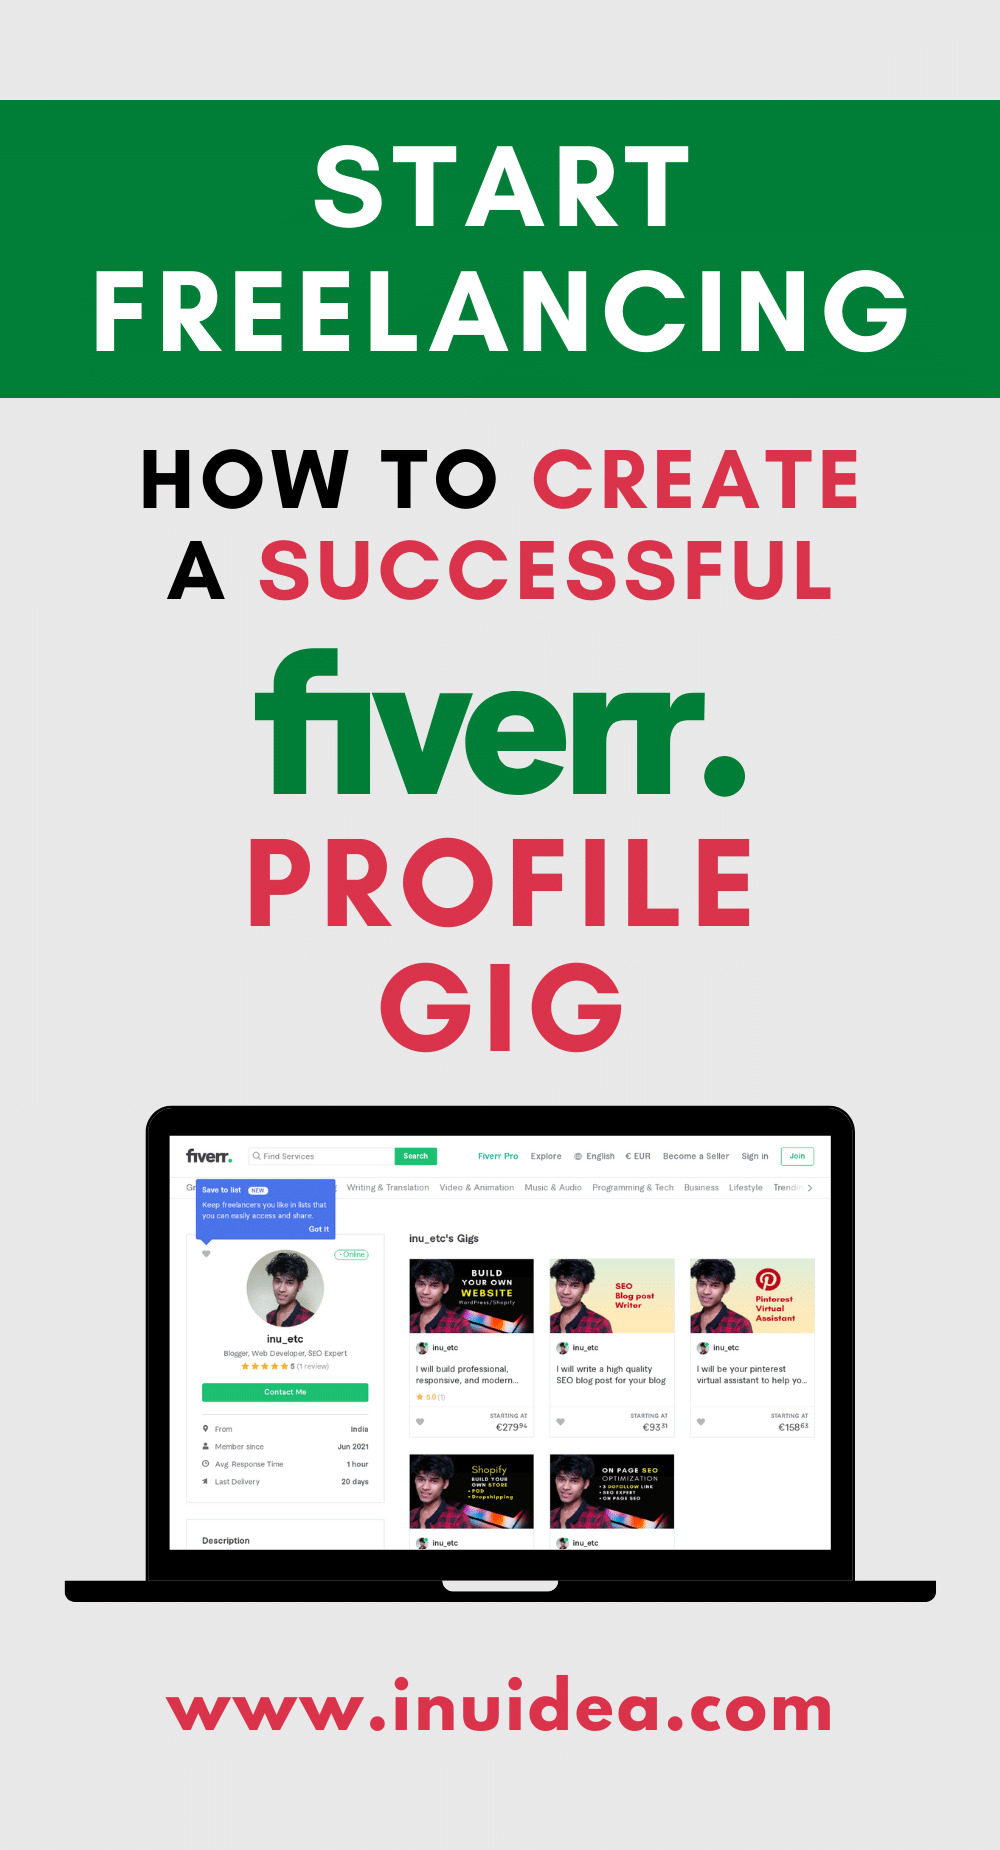 How to Create a Successful Fiverr Gig